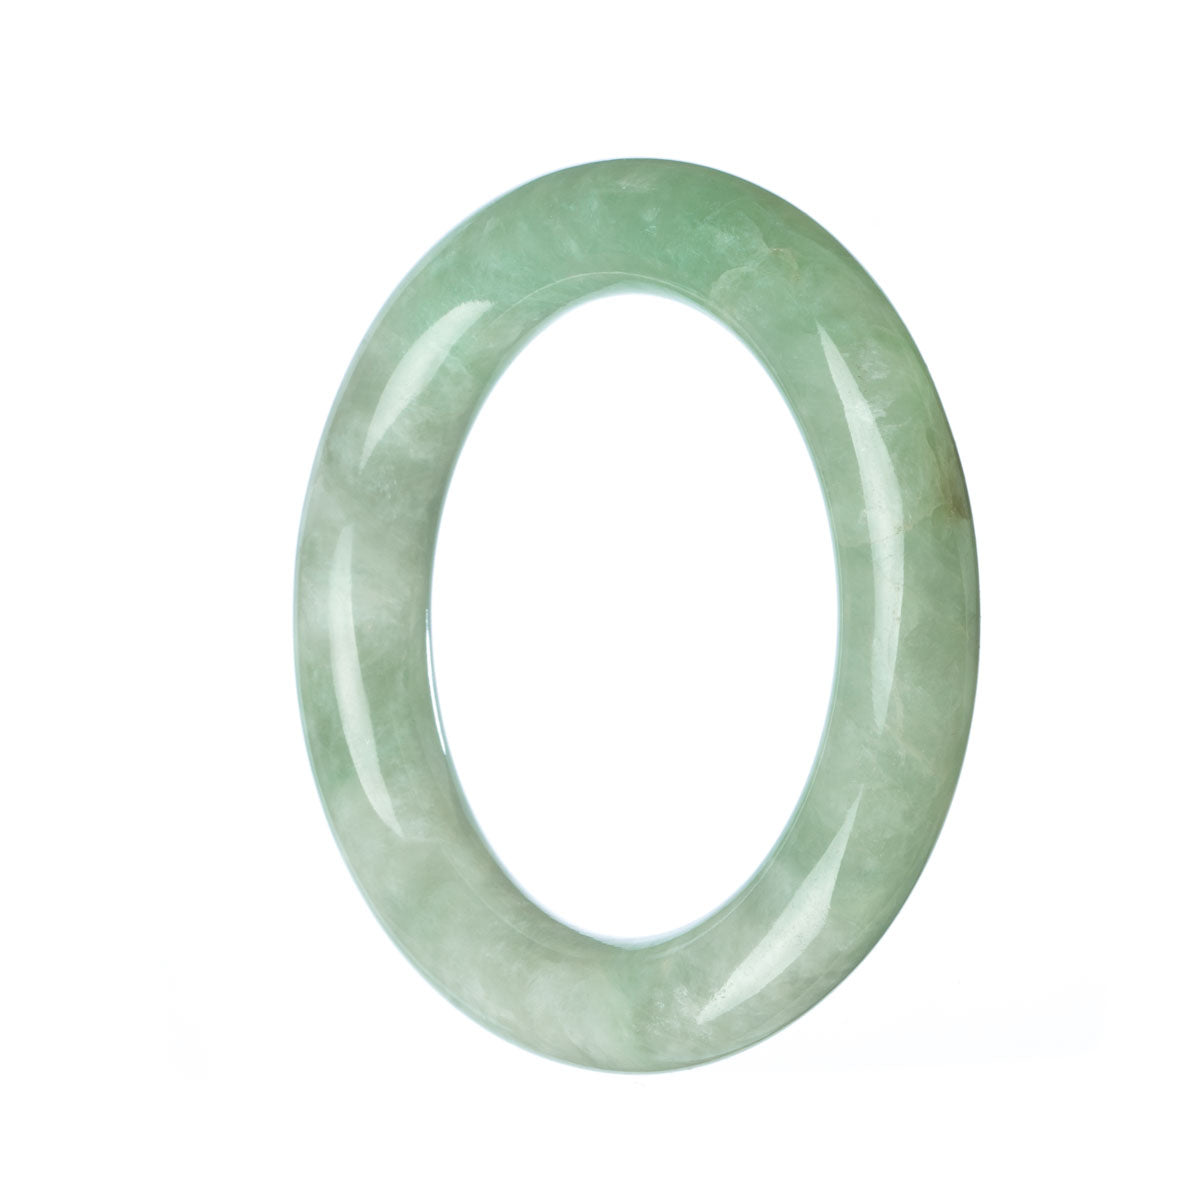 A close-up image of a round, green jade bangle bracelet. The bracelet is made of genuine Grade A green jade and measures 53mm in diameter. It features a smooth and polished surface, showcasing the natural beauty of the jade stone. The bracelet is from the MAYS™ collection.